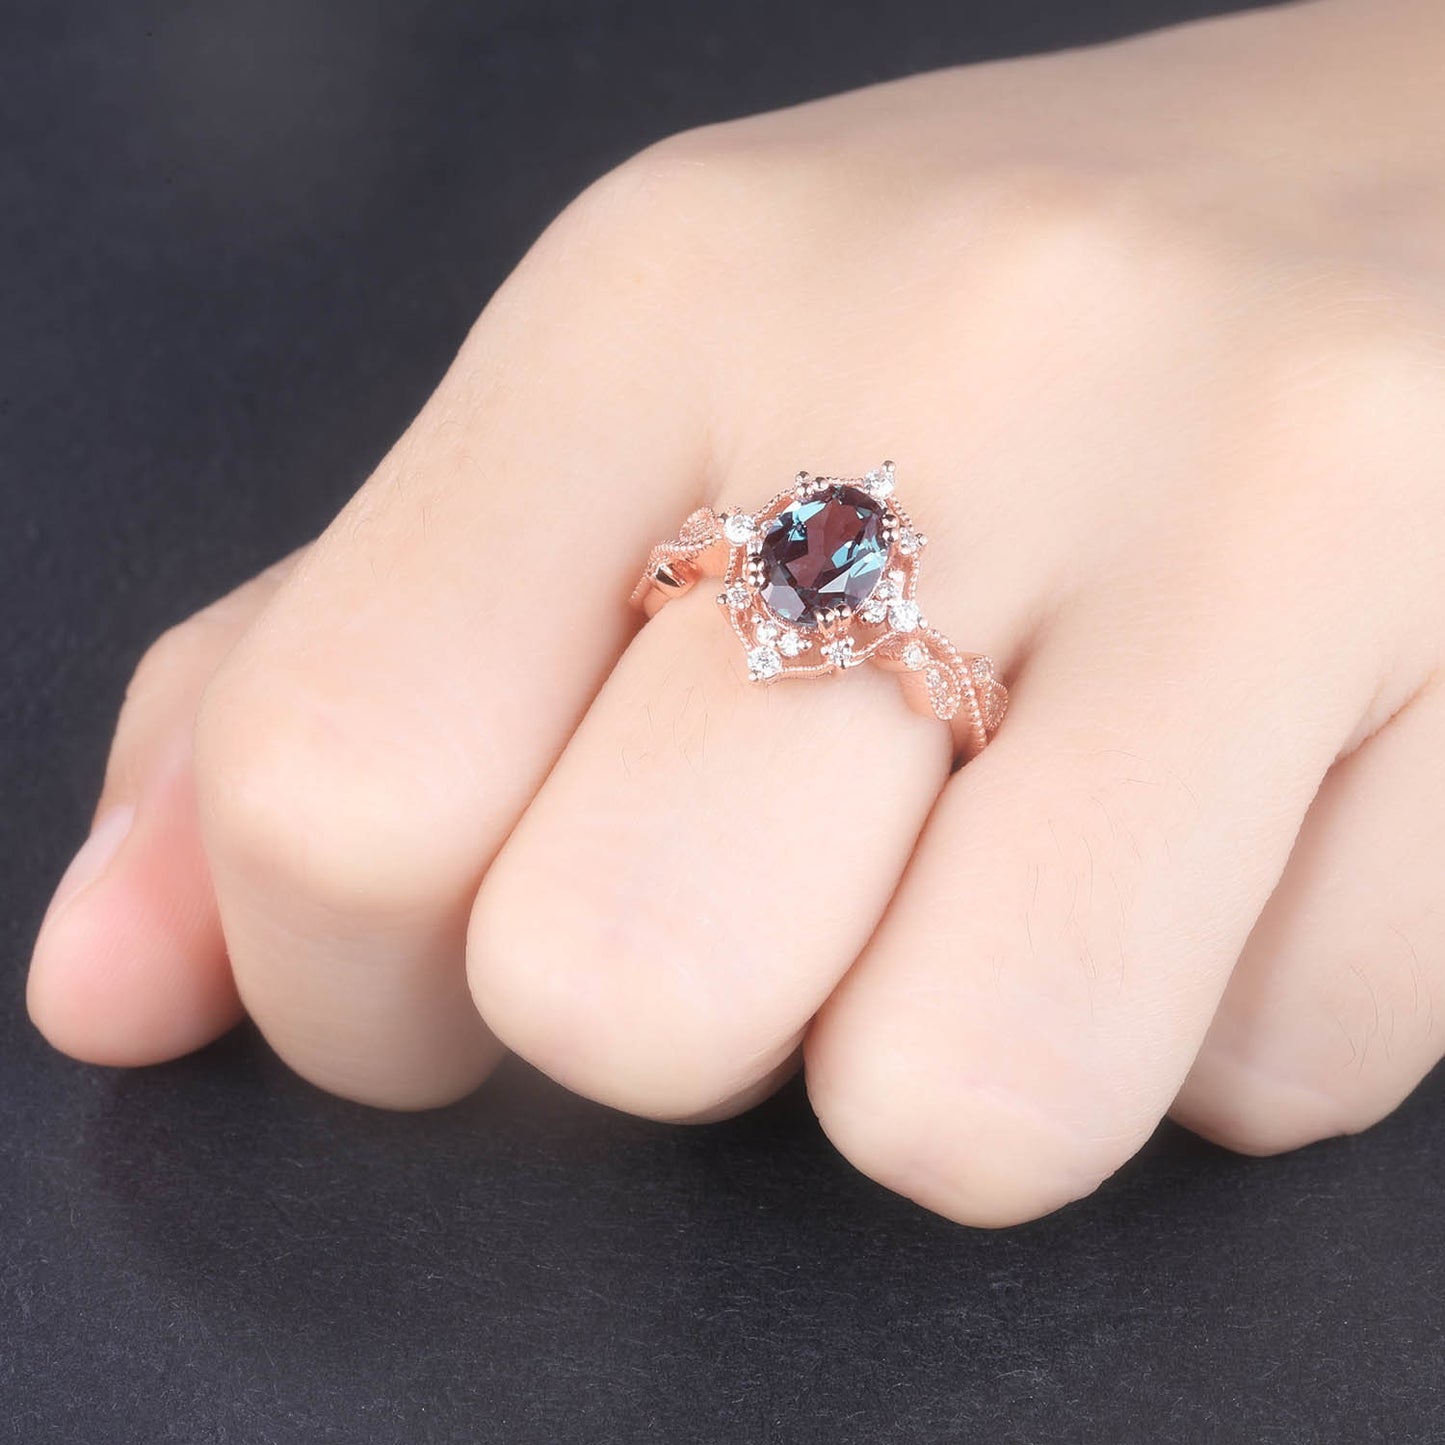 Vintage Alexandrite Engagement Ring Oval Shaped Rose Gold Ring Milgrain Art Deco Halo Diamond Ring Unique Promise Jewelry Gift For Her